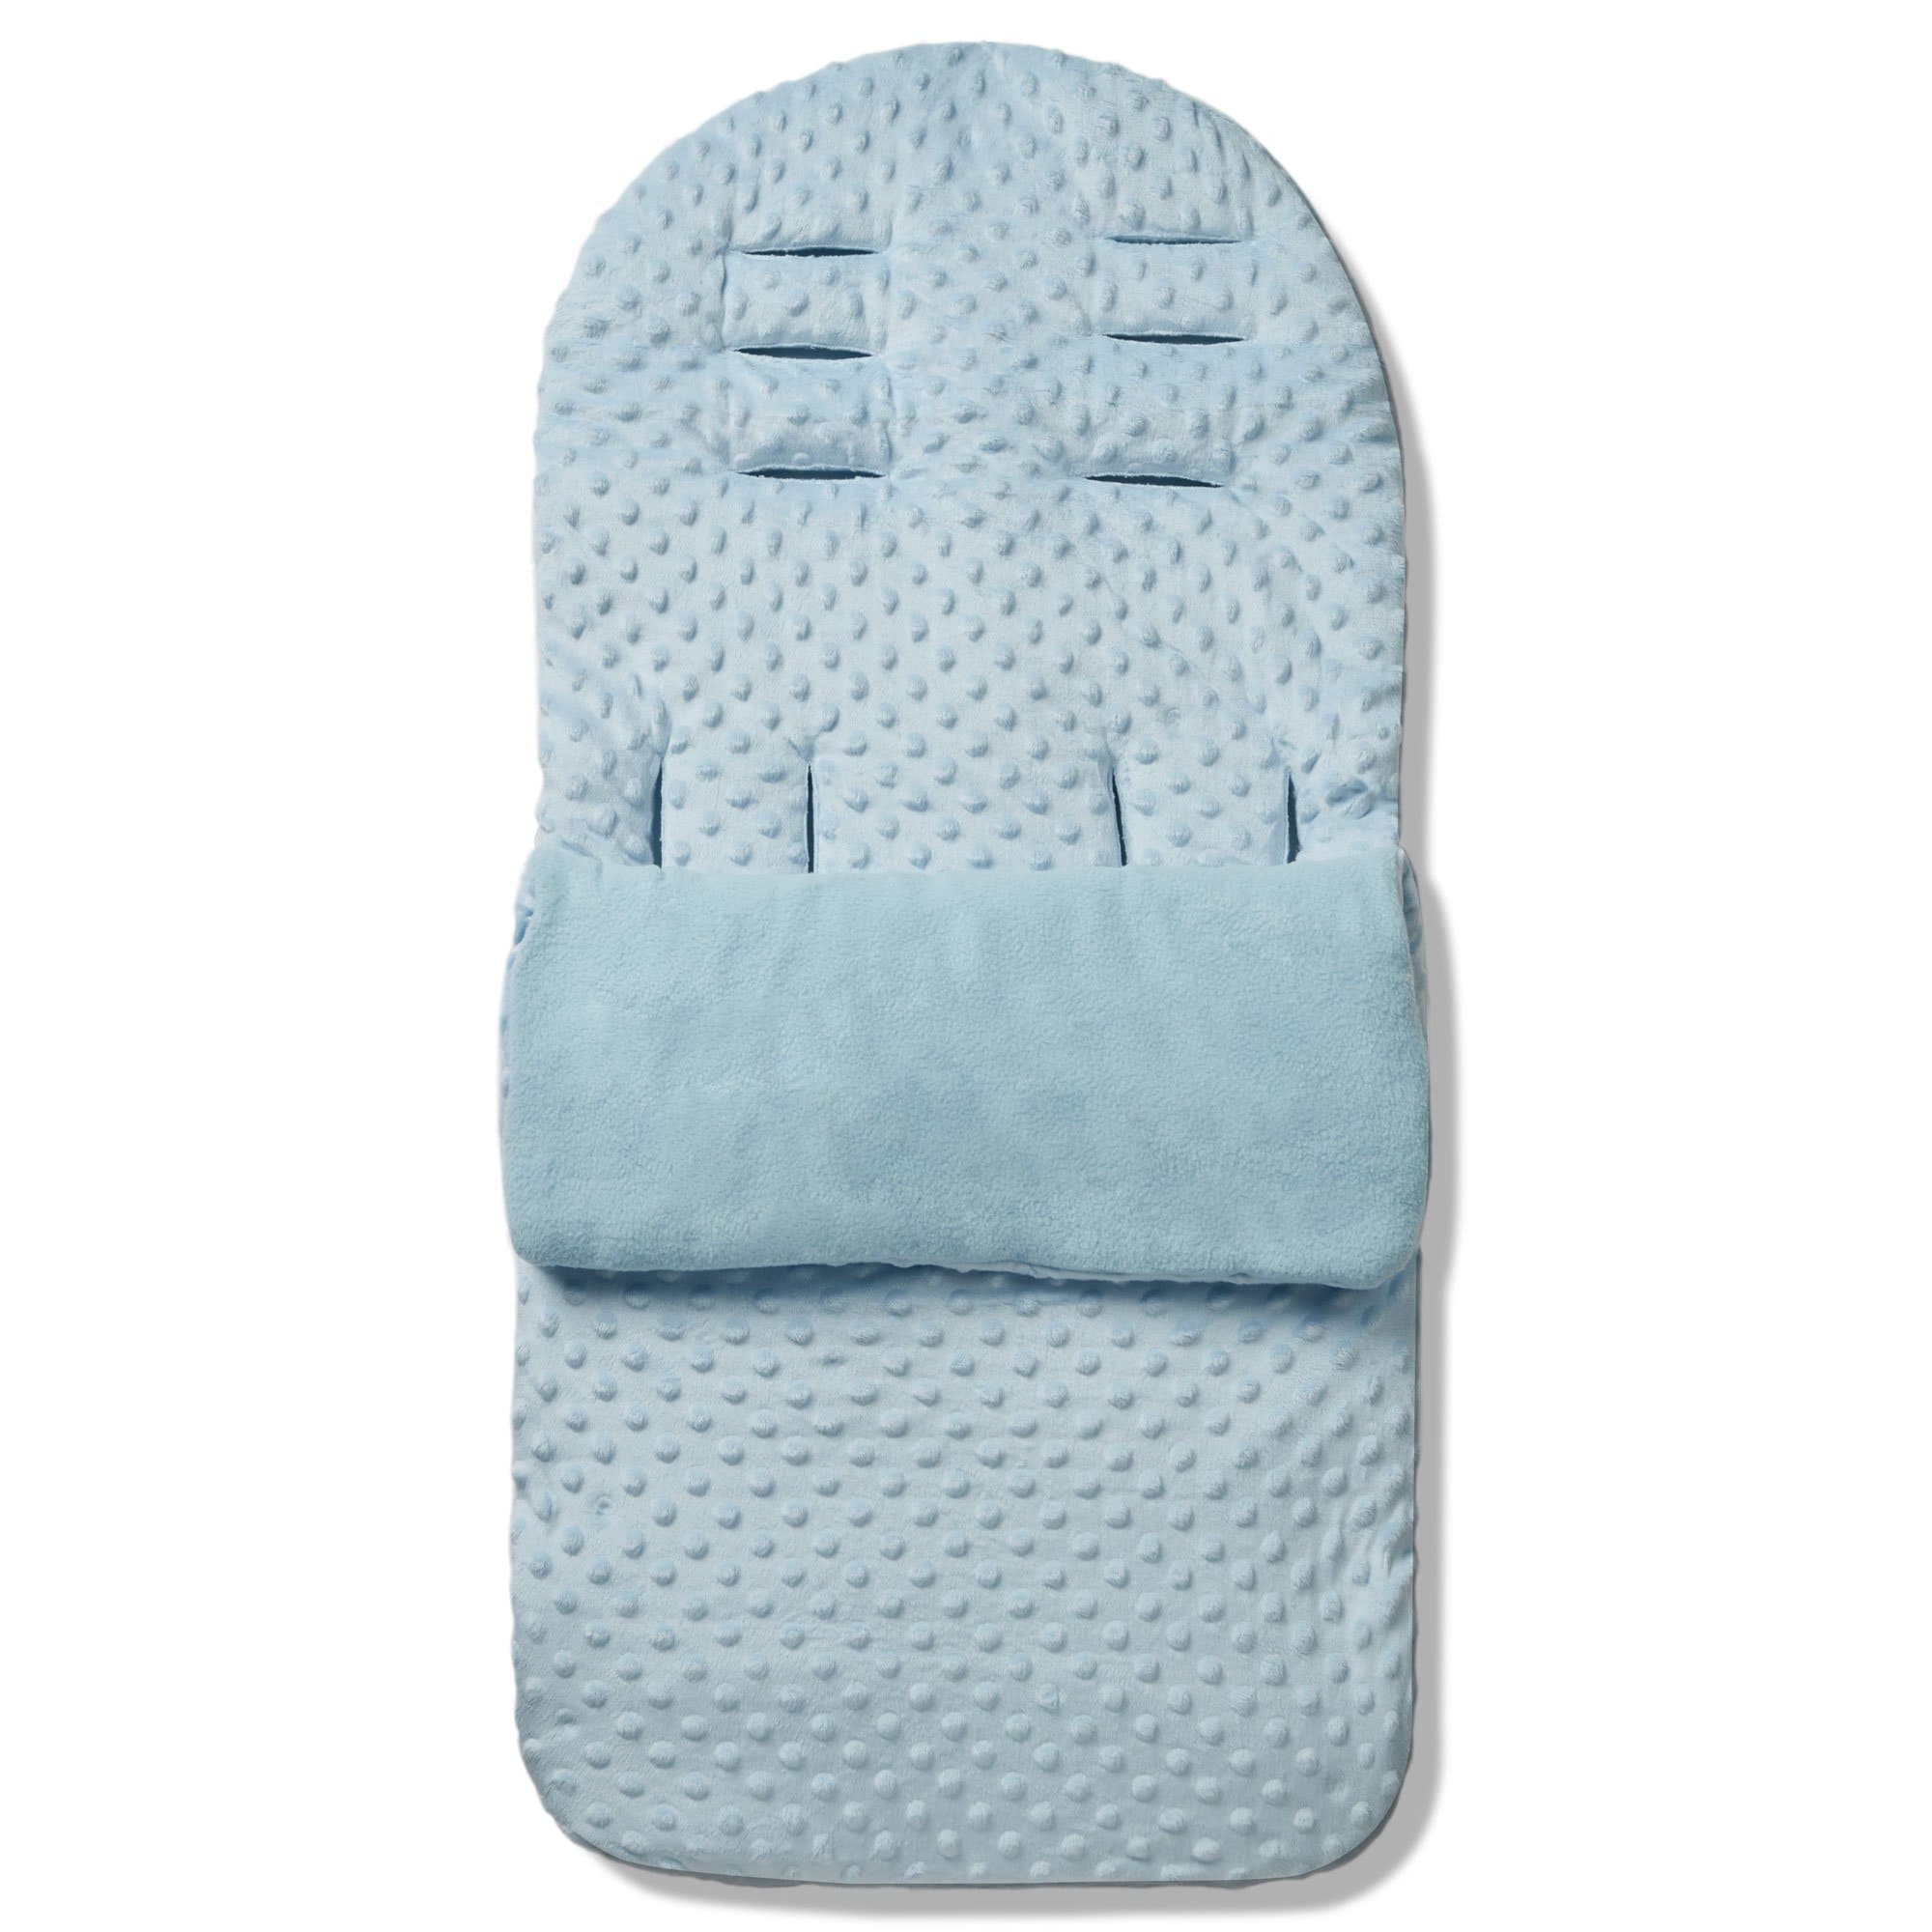 Dimple Footmuff / Cosy Toes Compatible with BabyCare - Blue / Fits All Models | For Your Little One